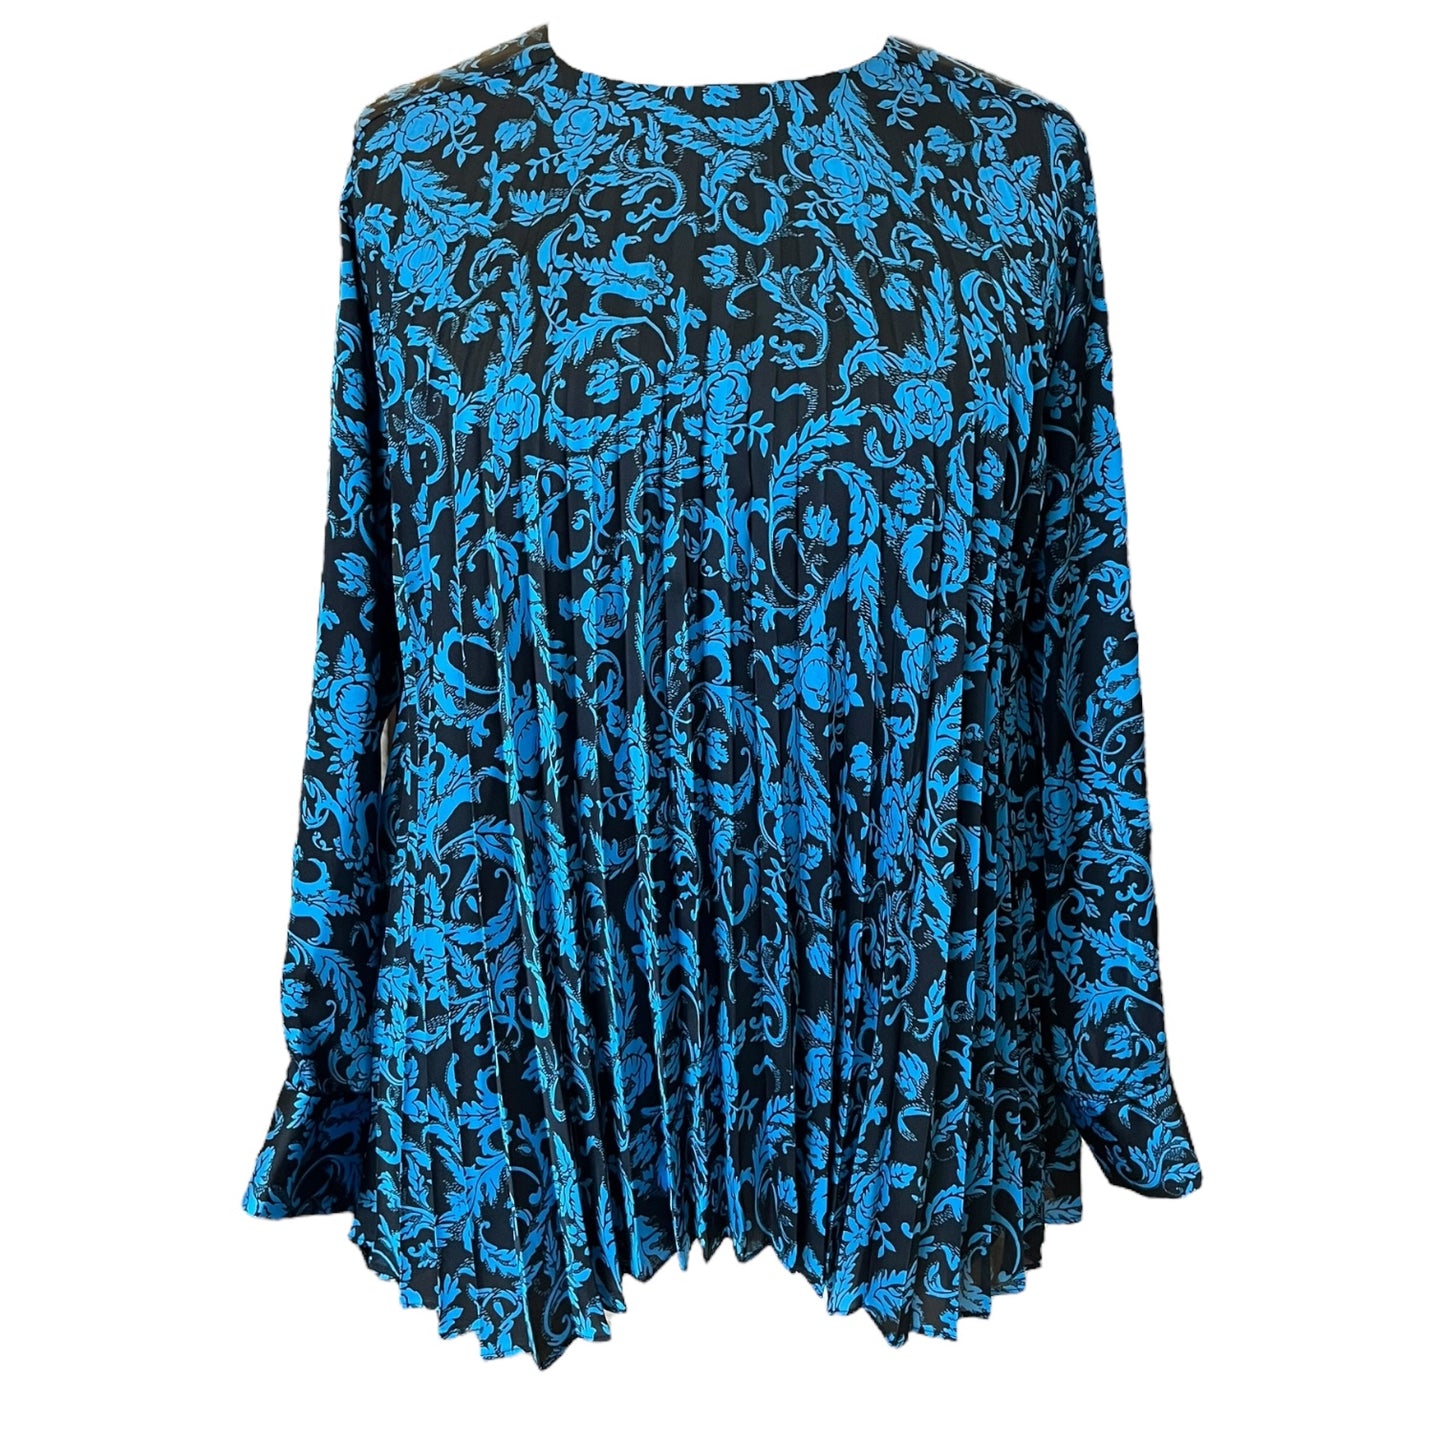 Sandro Blue Patterned Top